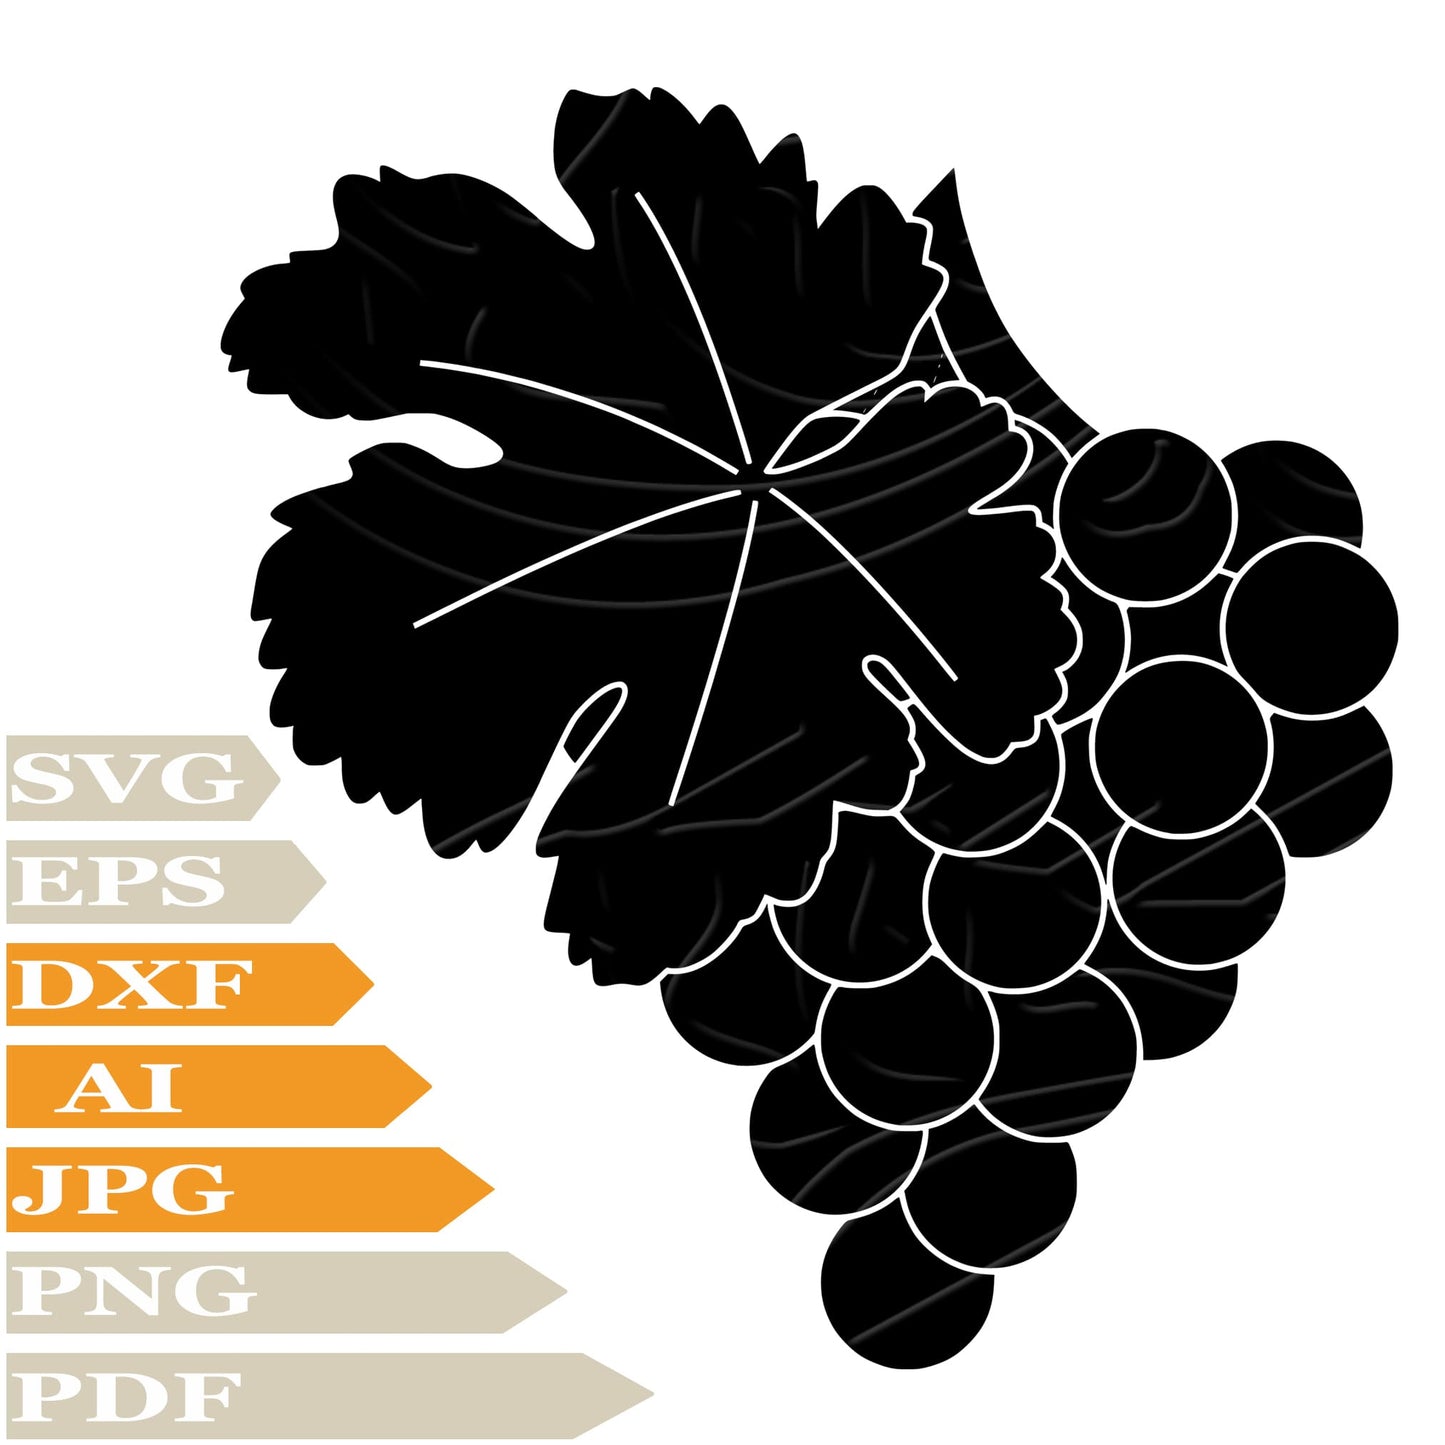 Grape SVG, Wine SVG Design, Vineyard Vector Graphics, Grapes For Cricut, For Tattoo, Clip Art, Cut File, T-Shirts, Silhouette, All Available